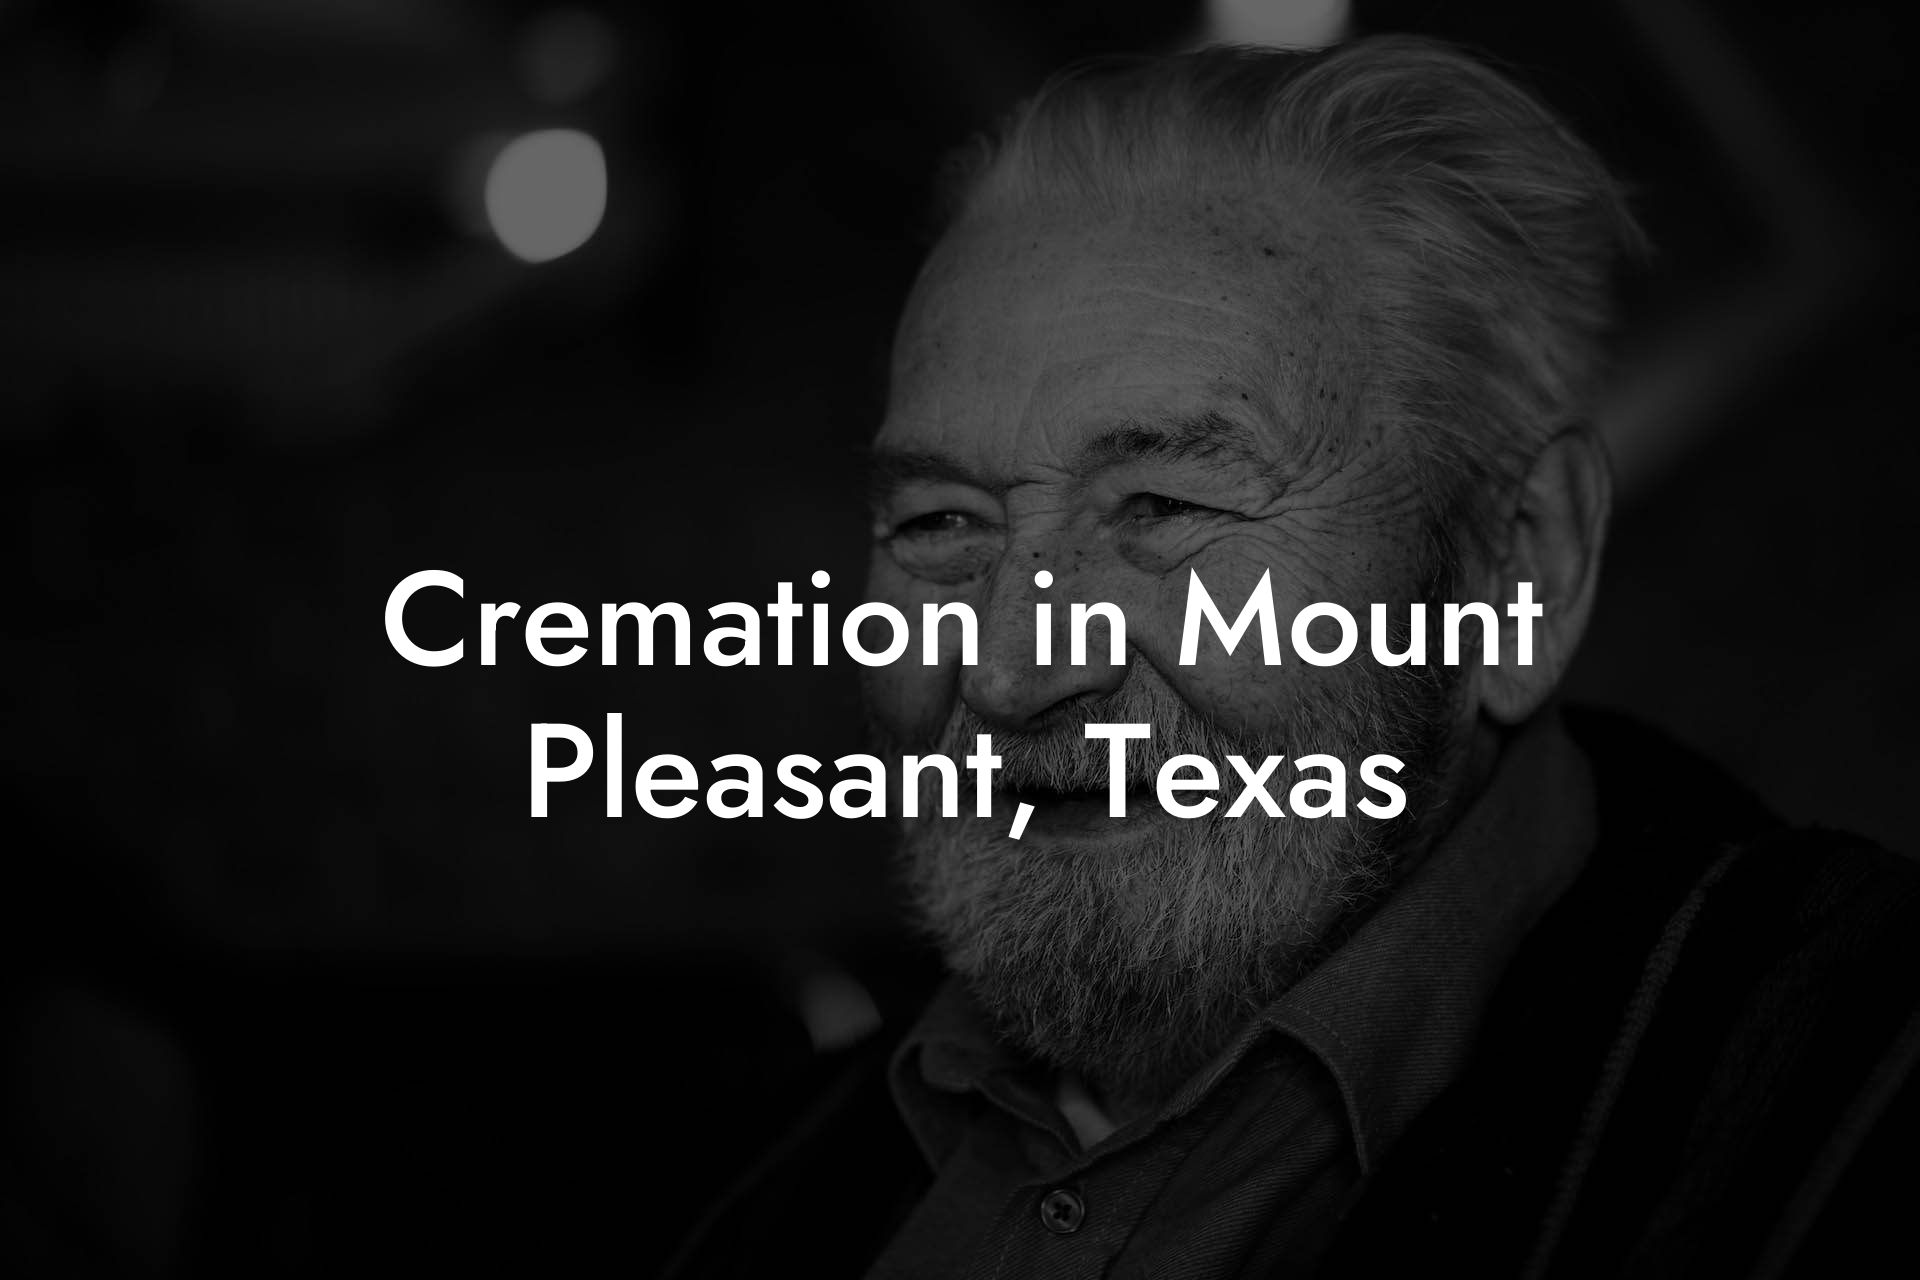 Cremation in Mount Pleasant, Texas